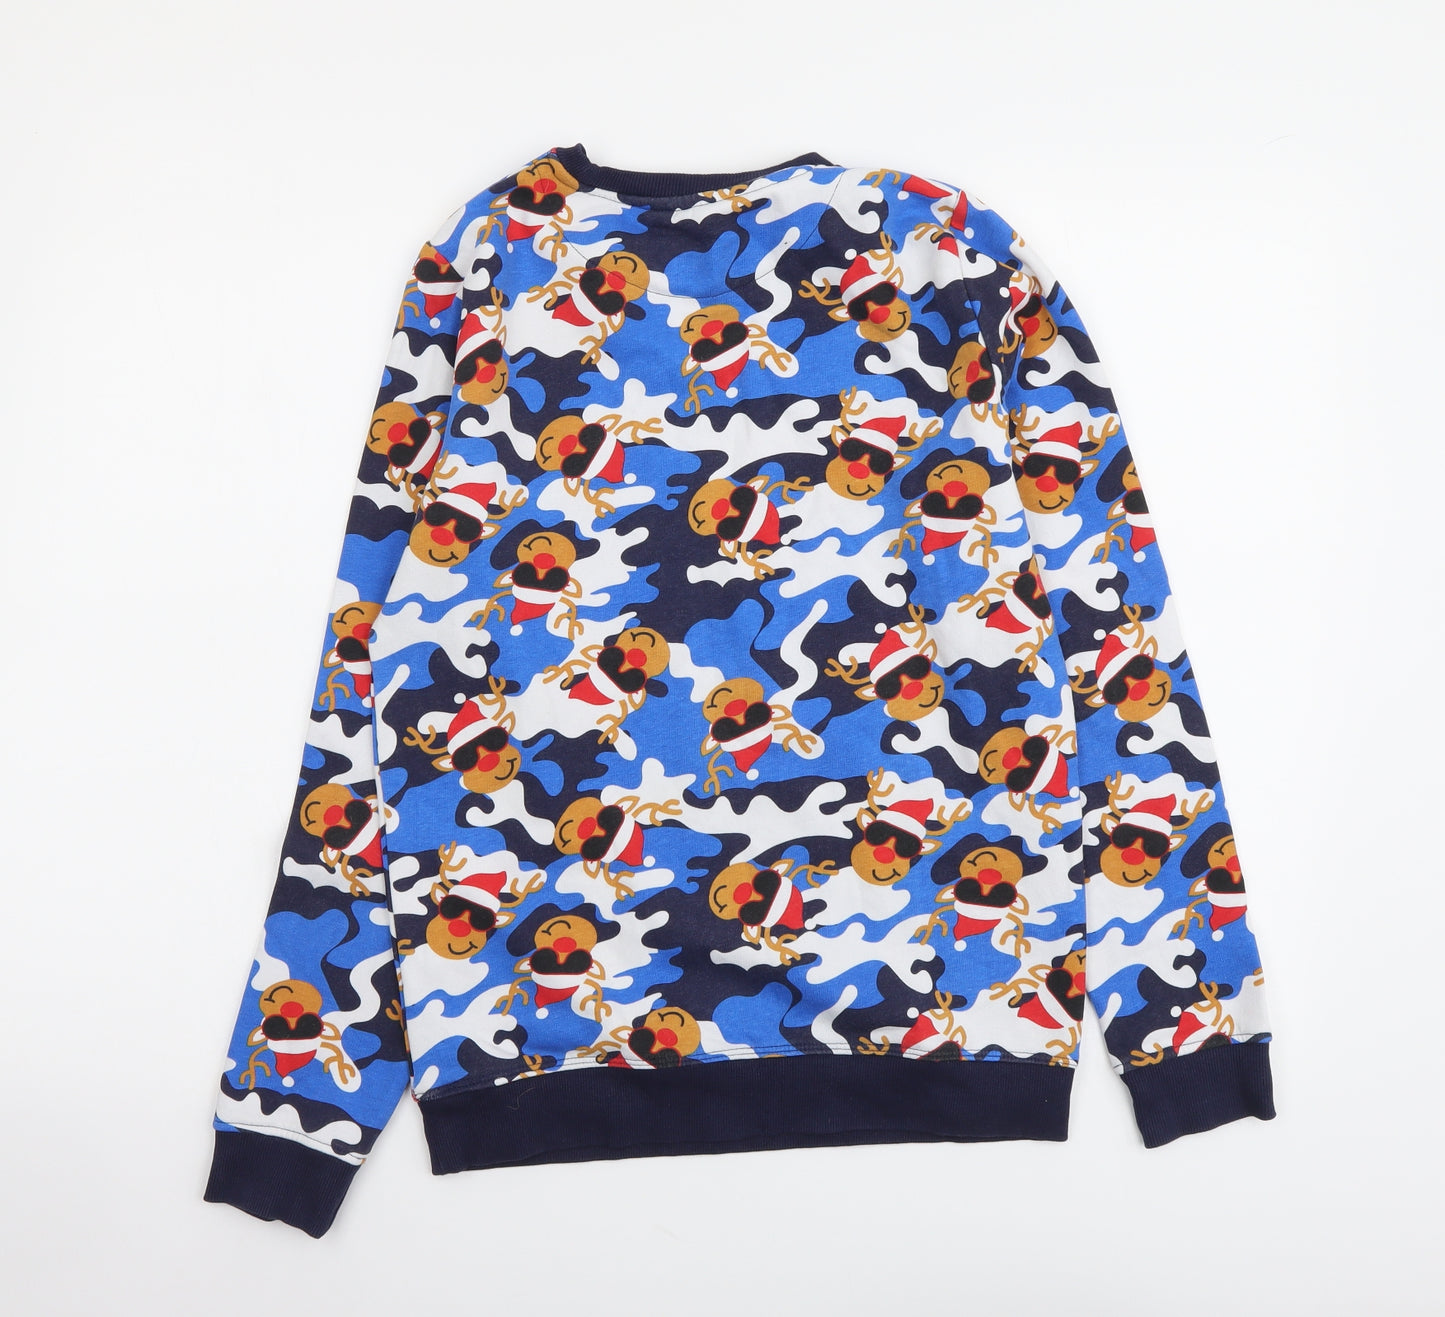 PEP&CO. Boys Blue Camouflage Polyester Pullover Sweatshirt Size 12-13 Years Pullover - Reindeer